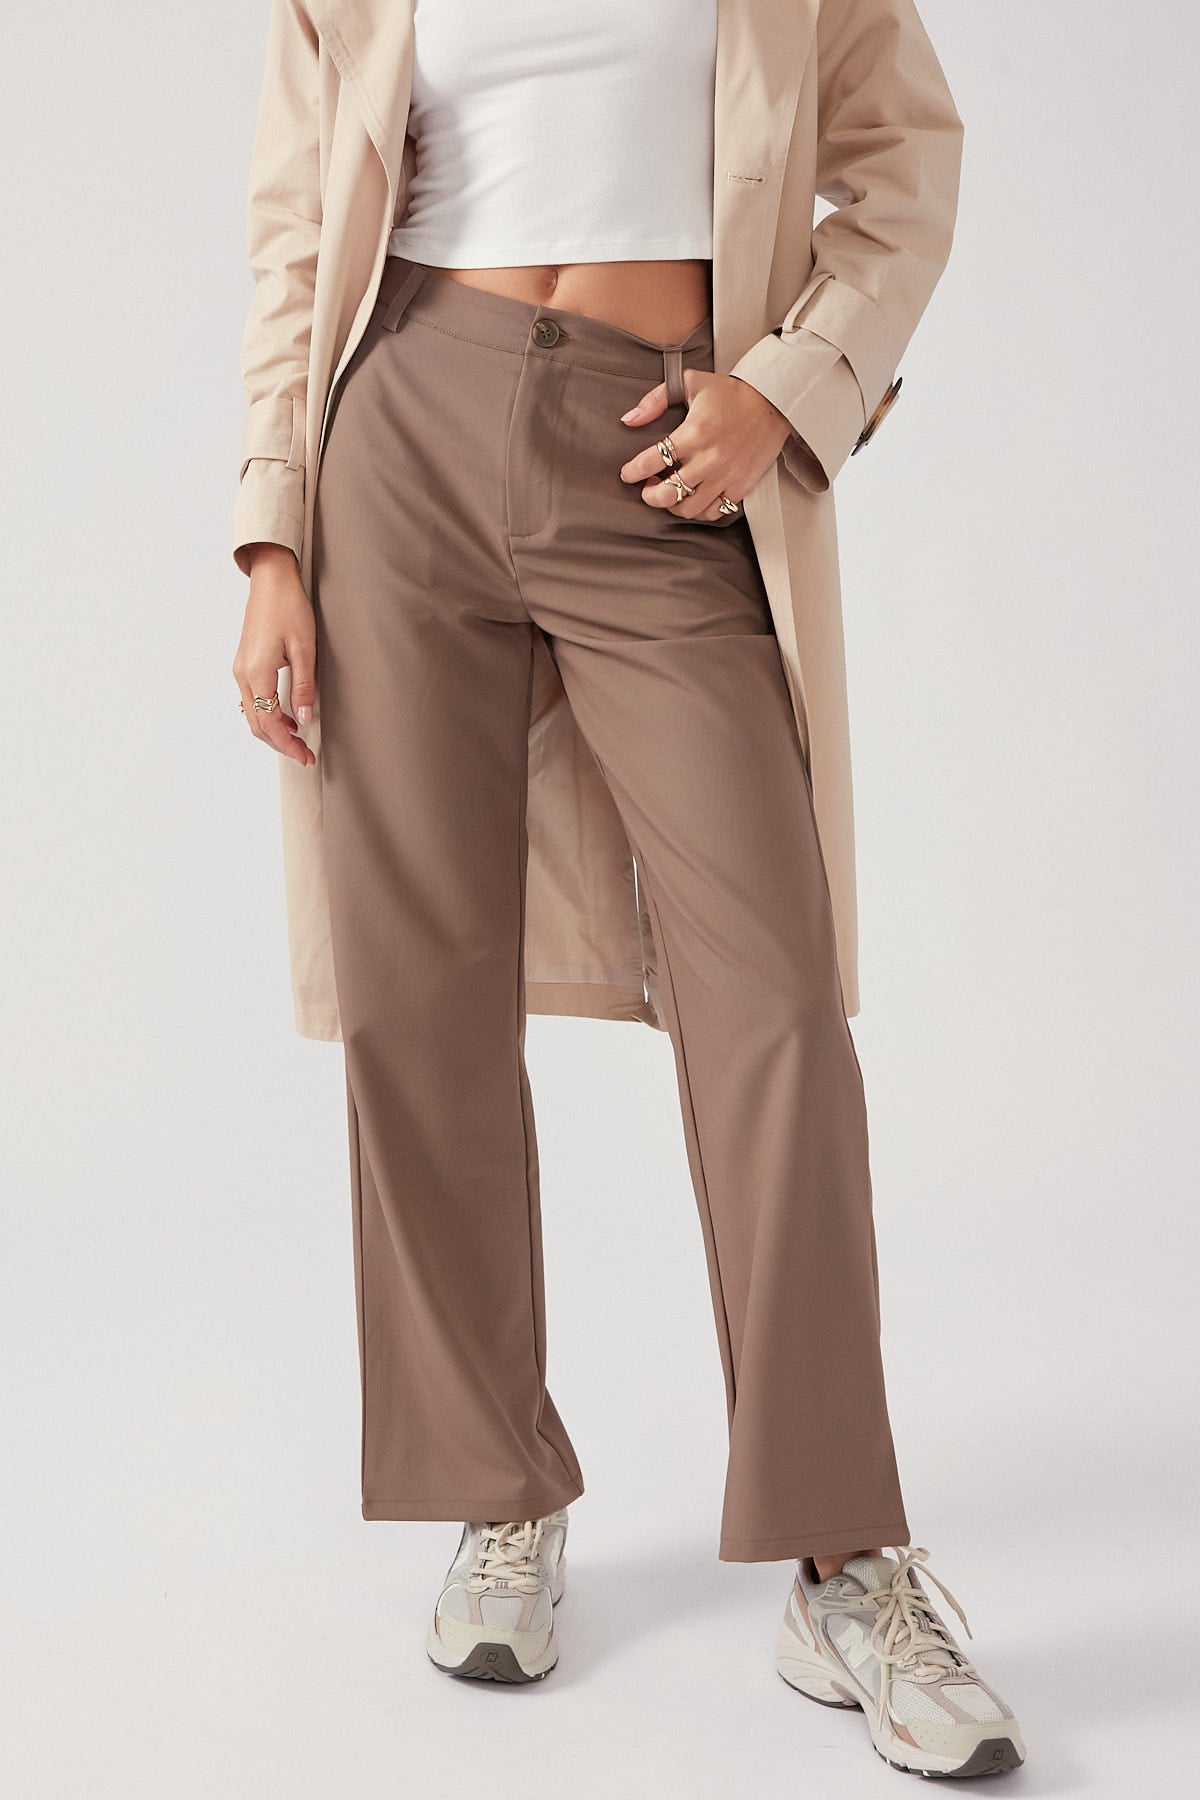 Perfect Stranger Locale Pant Brown